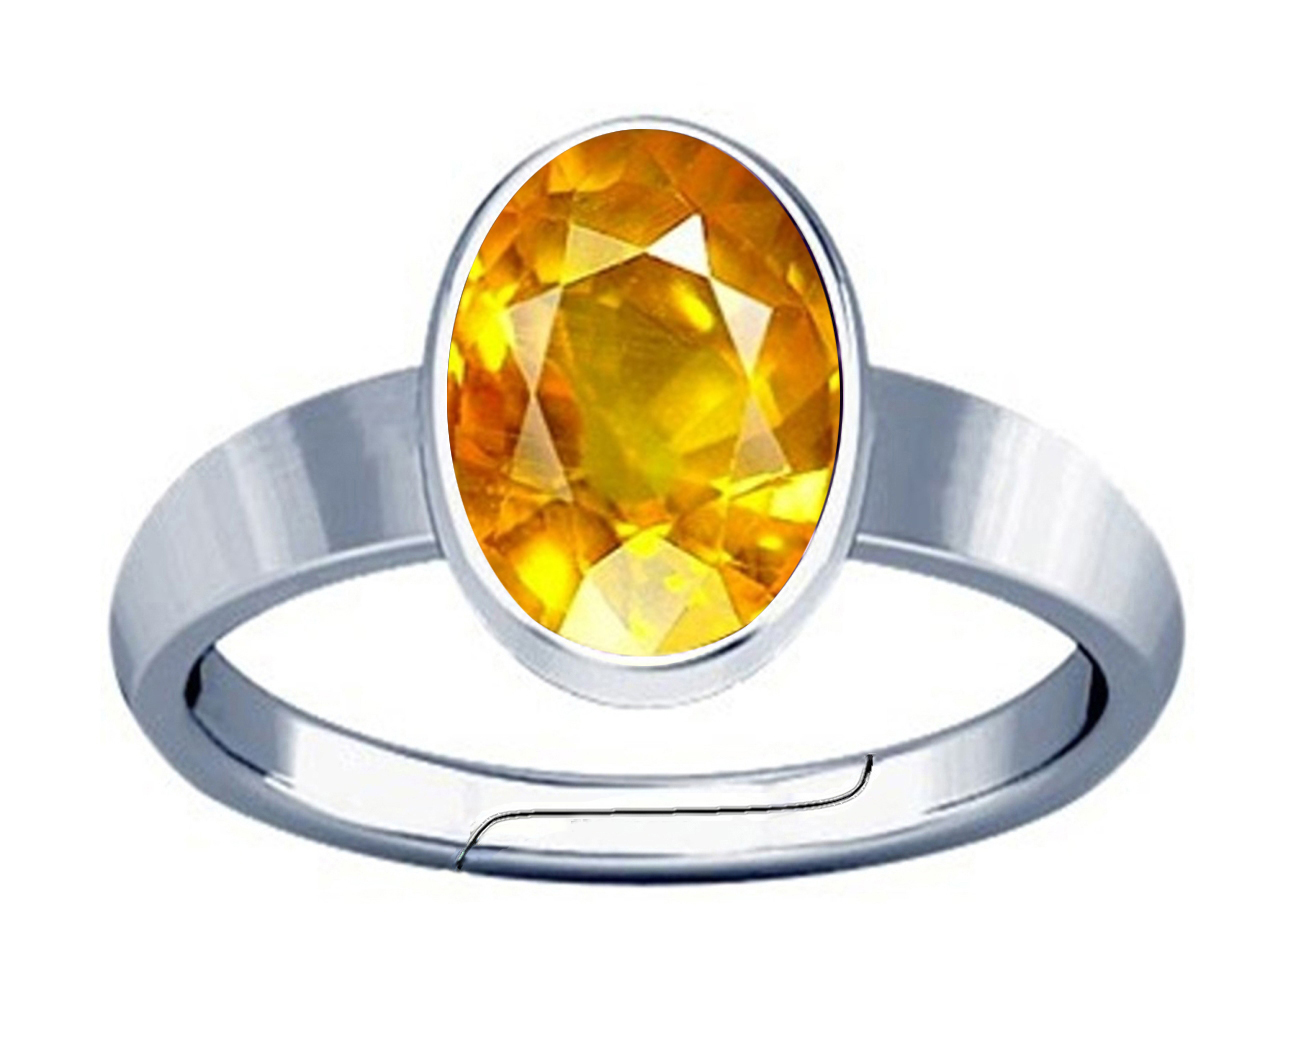 I wear pukhraj stone/yellow sapphire on a silver ring. Is it okay? - Quora